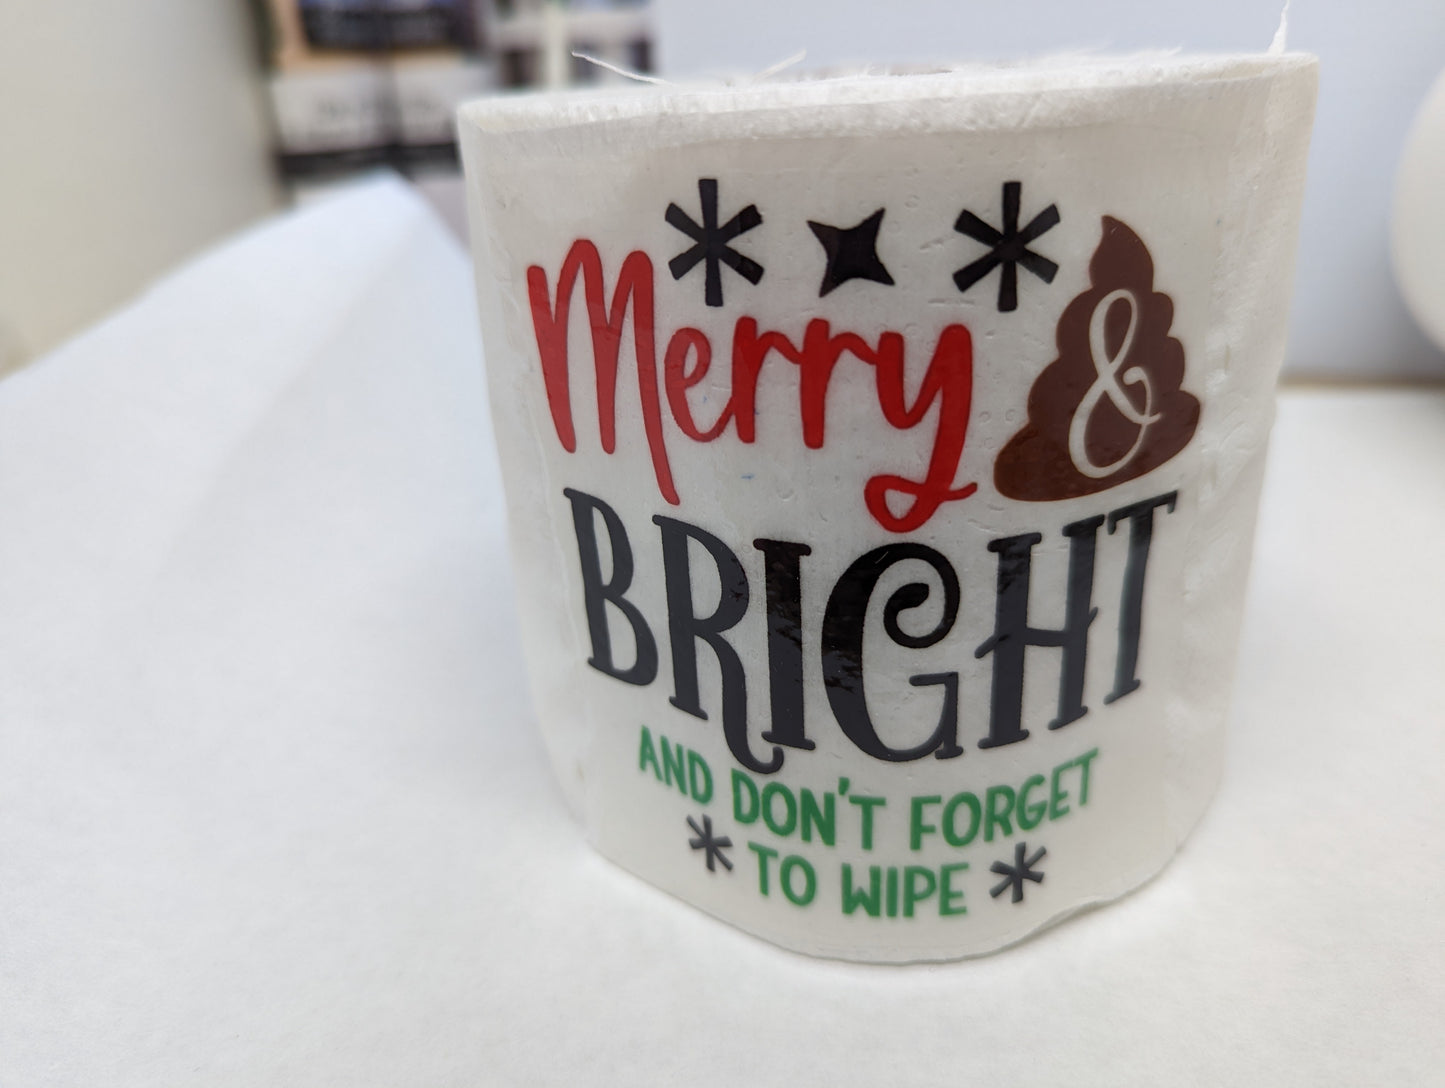 Toliet Paper Merry Bright Don't forget to wipe